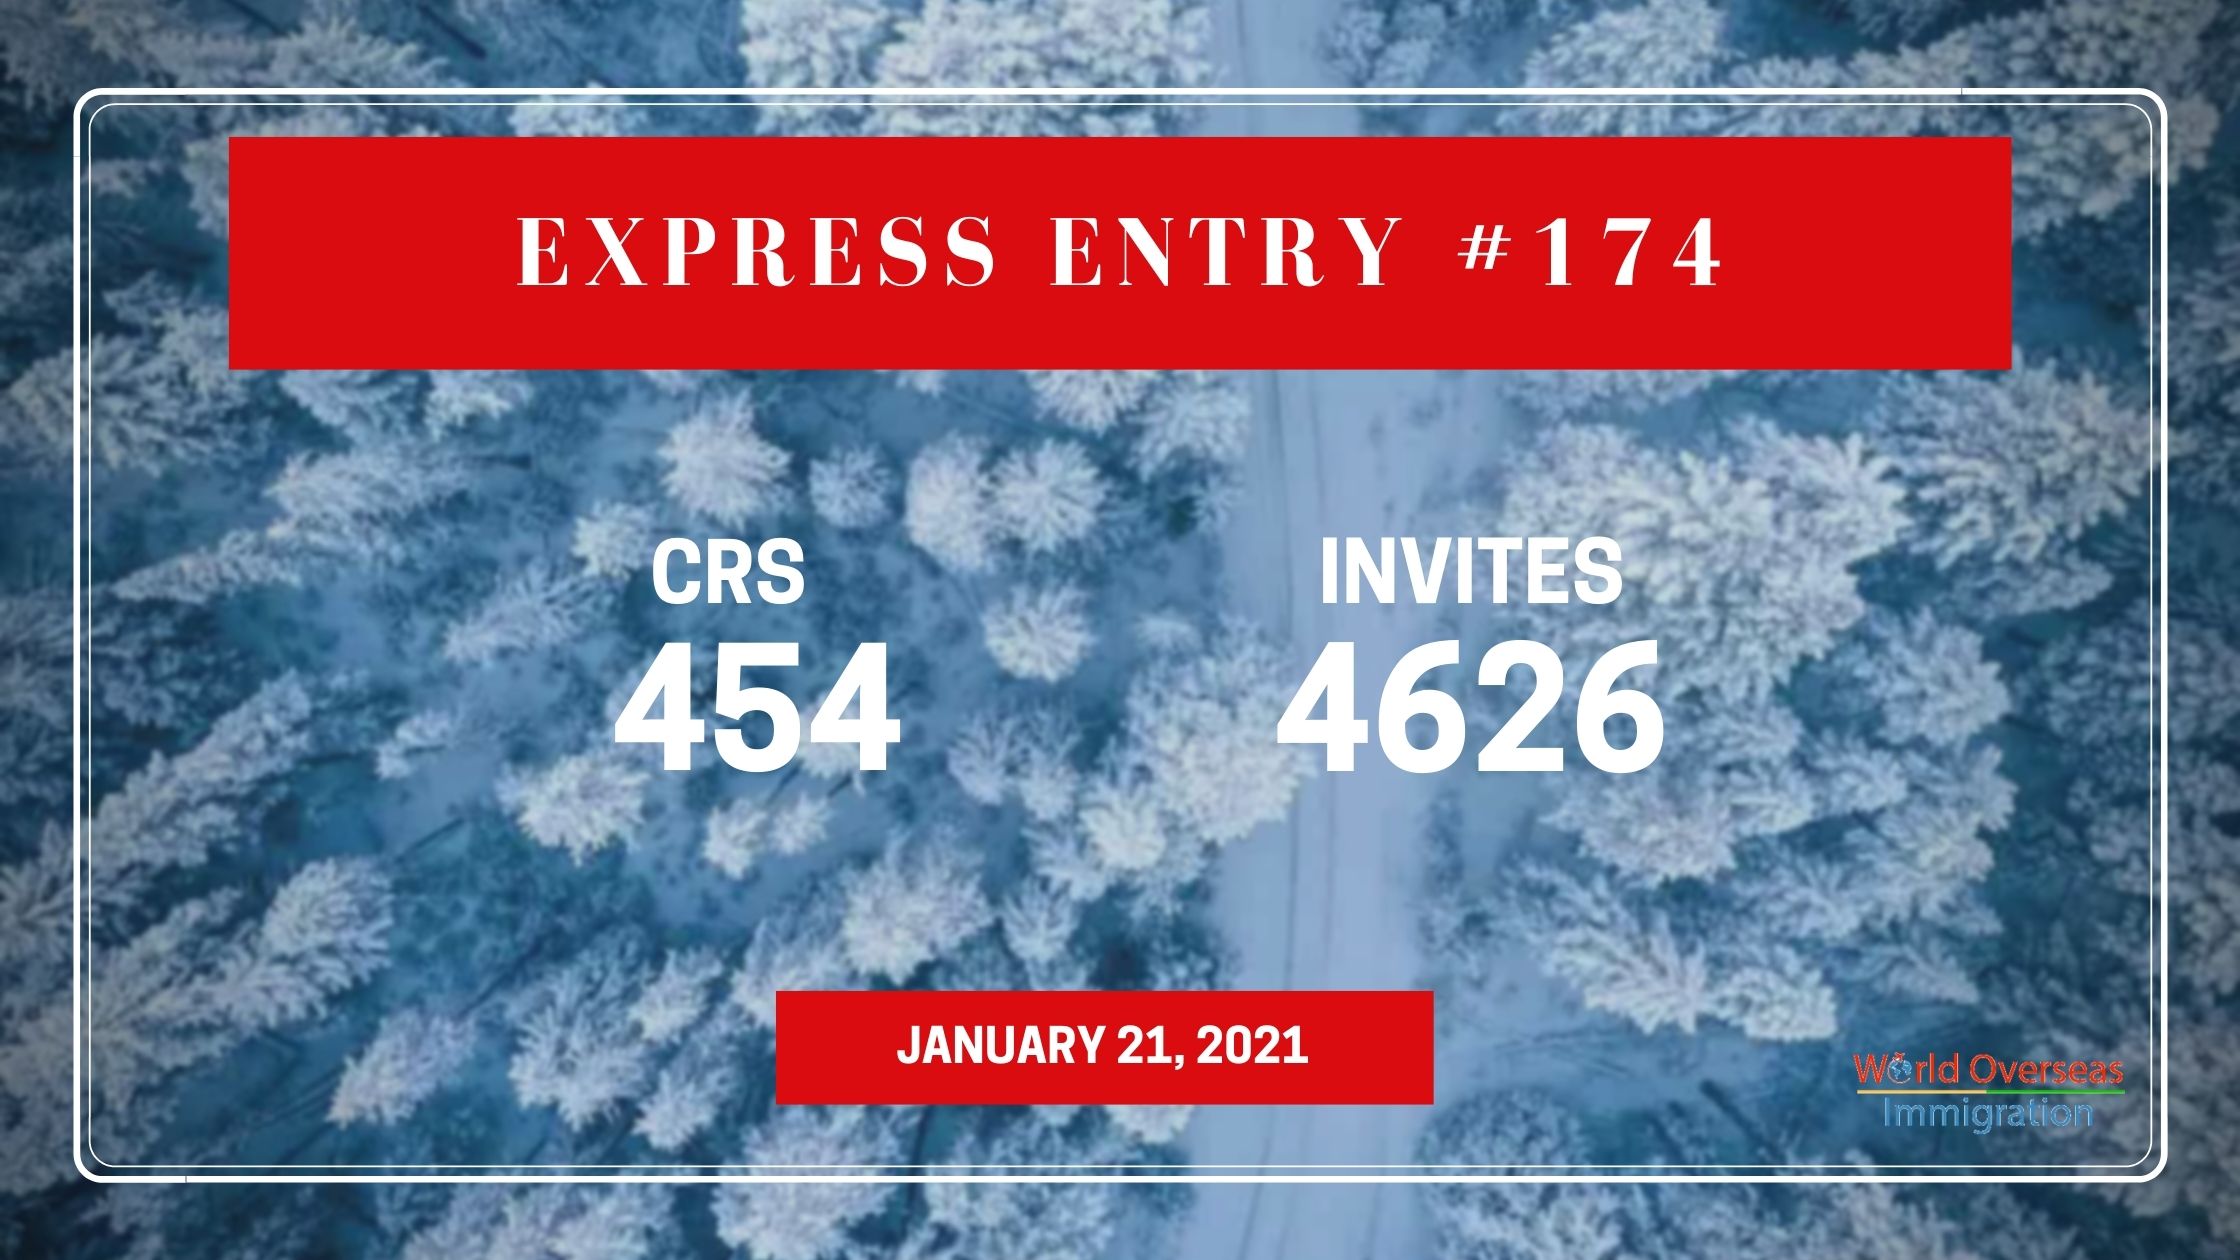 Express Entry #174: 4,626 ITAs are issued in the new draw